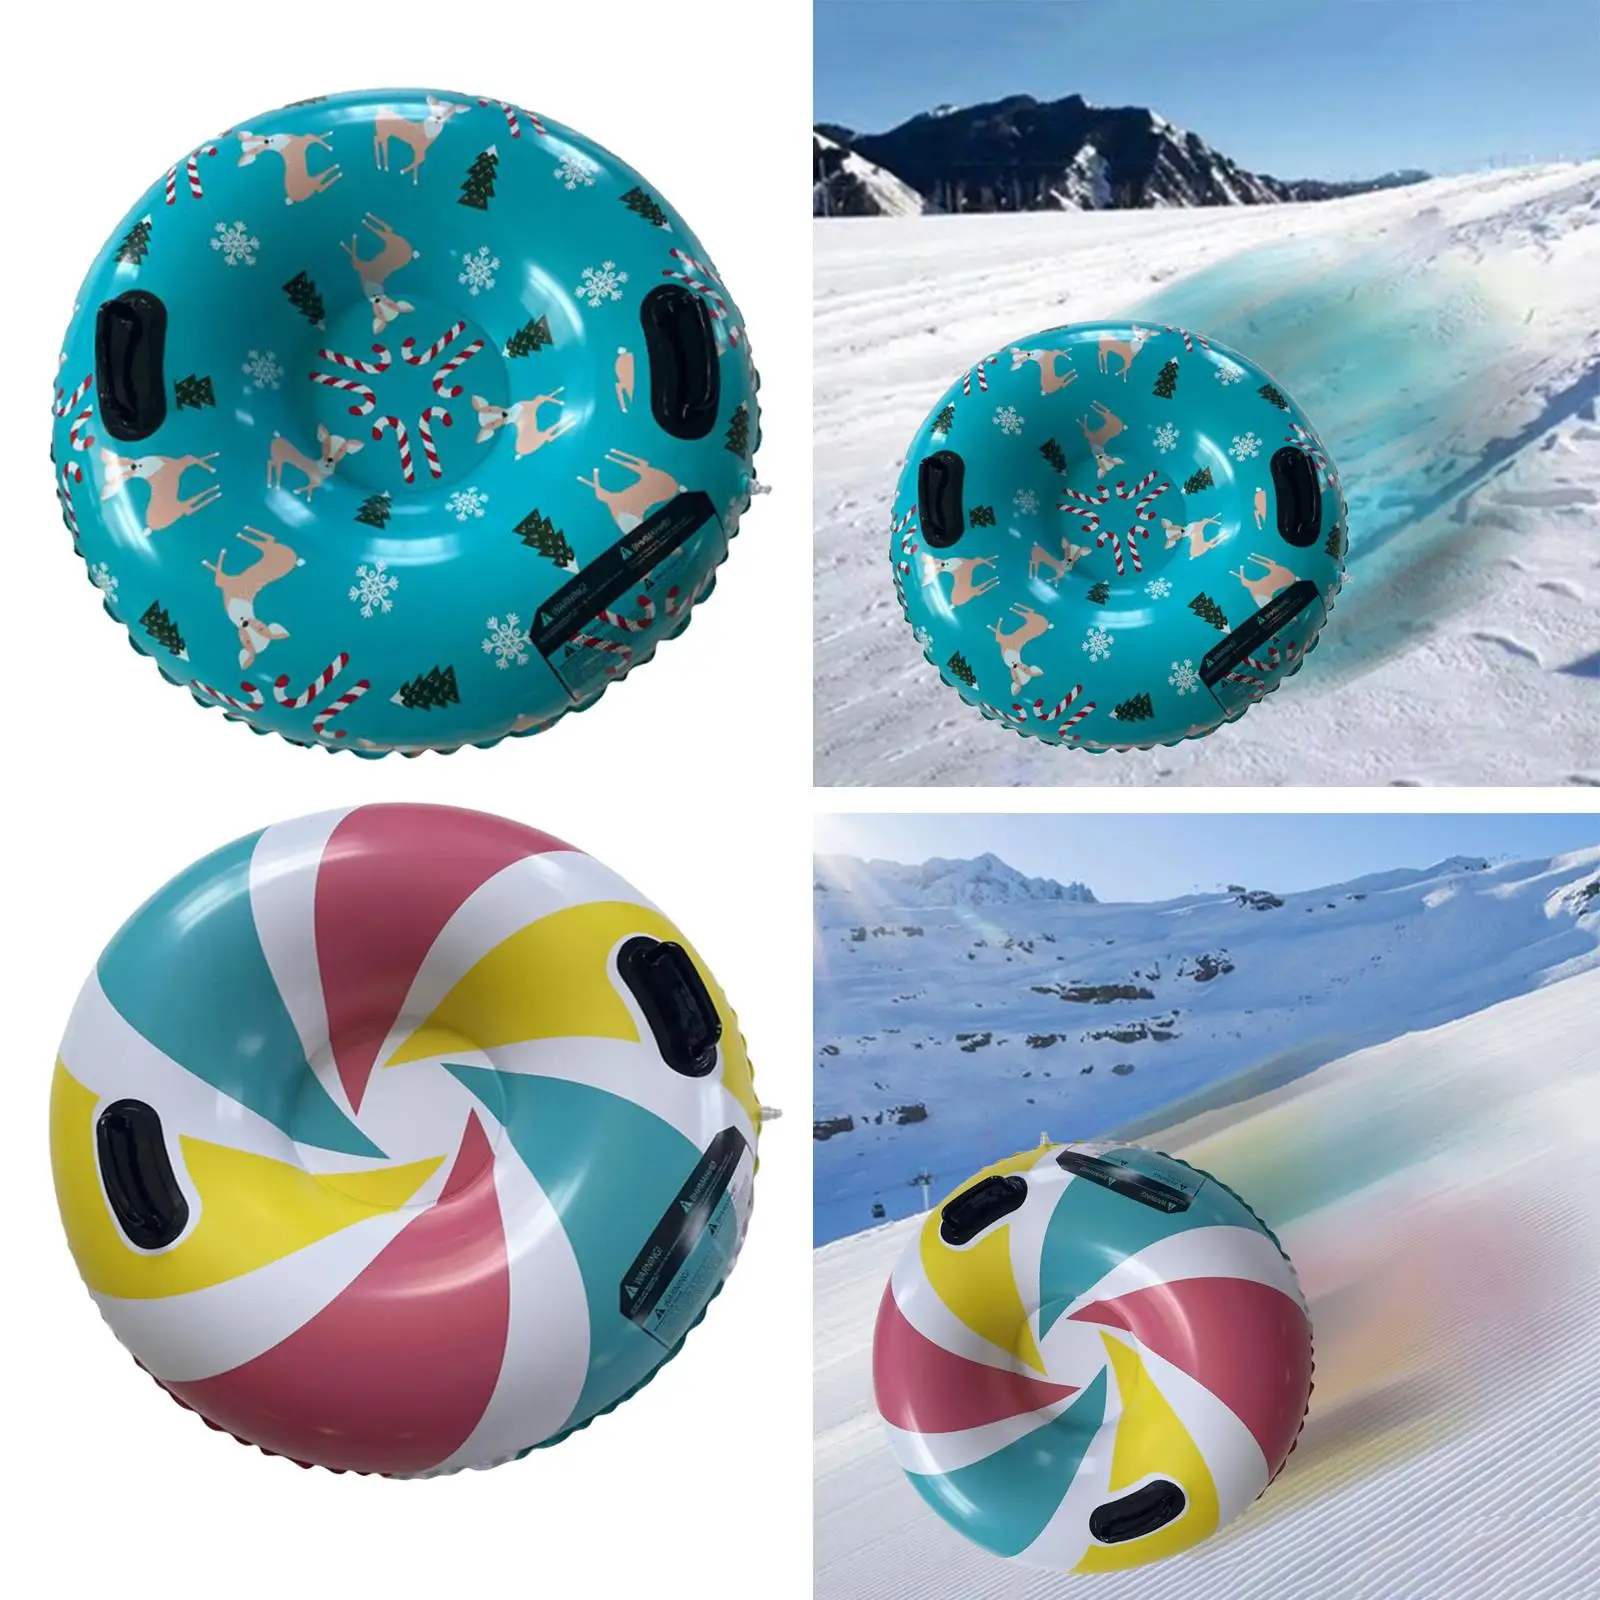 Heavy Duty Winter Snow Tube Easy to Carry Diameter 91cm Tube Snow Toy Thick